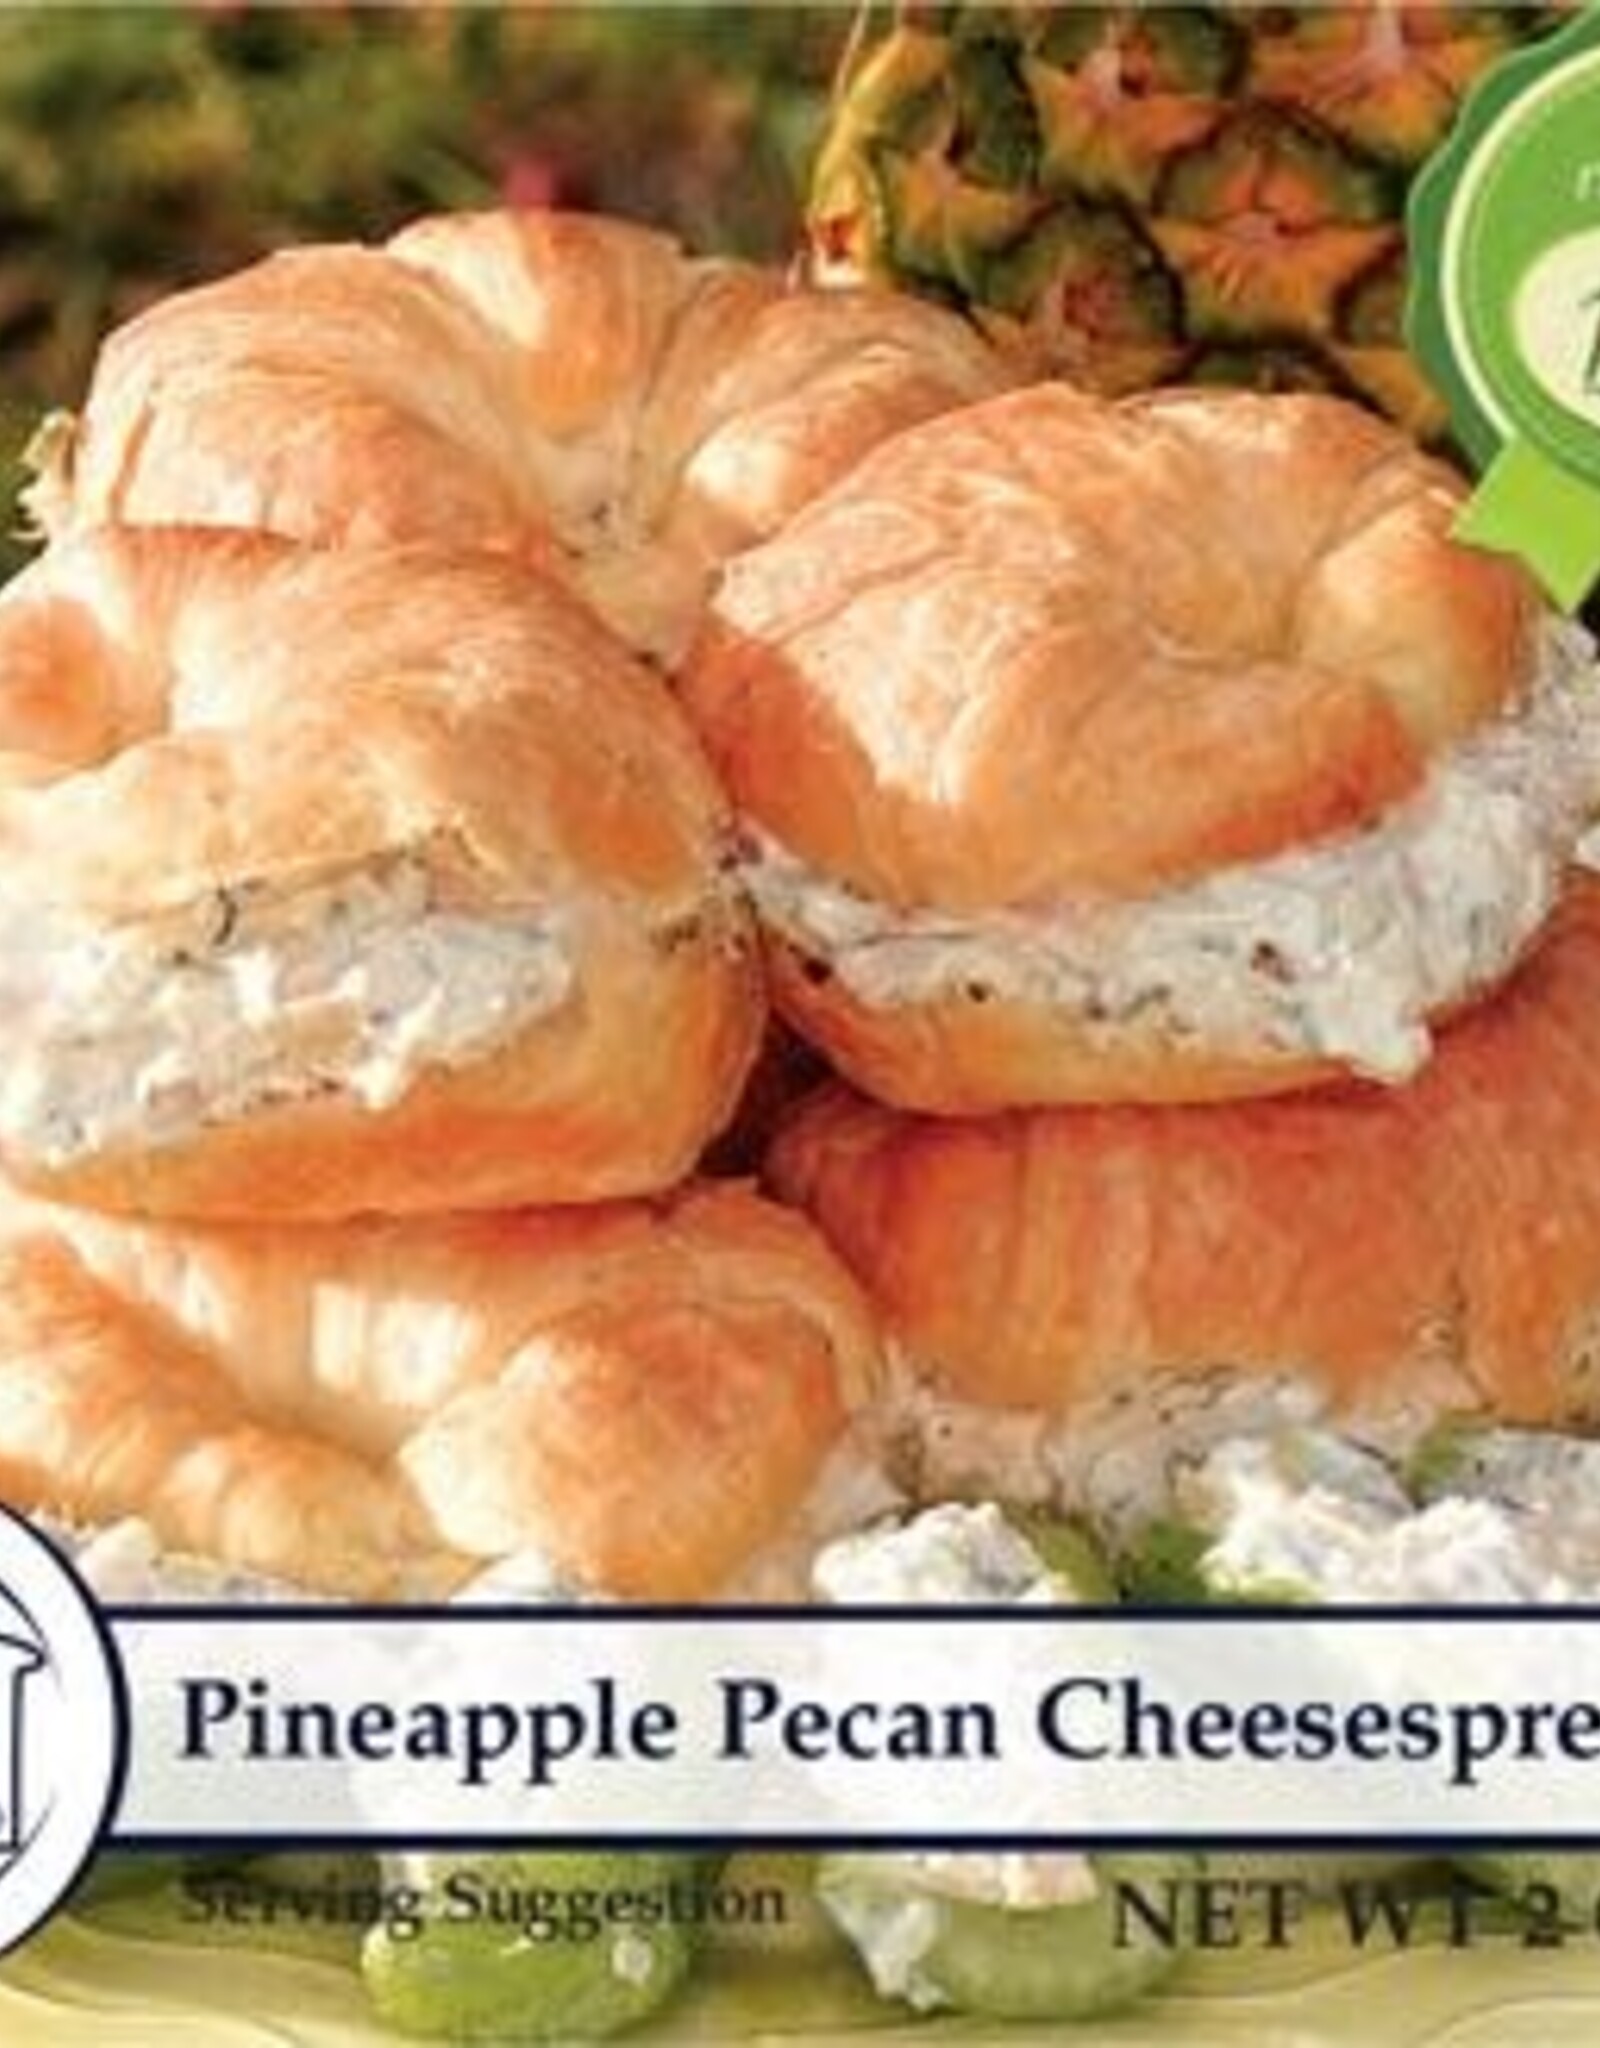 Country Home Creations PINEAPPLE PECAN CHEESESPREAD MIX